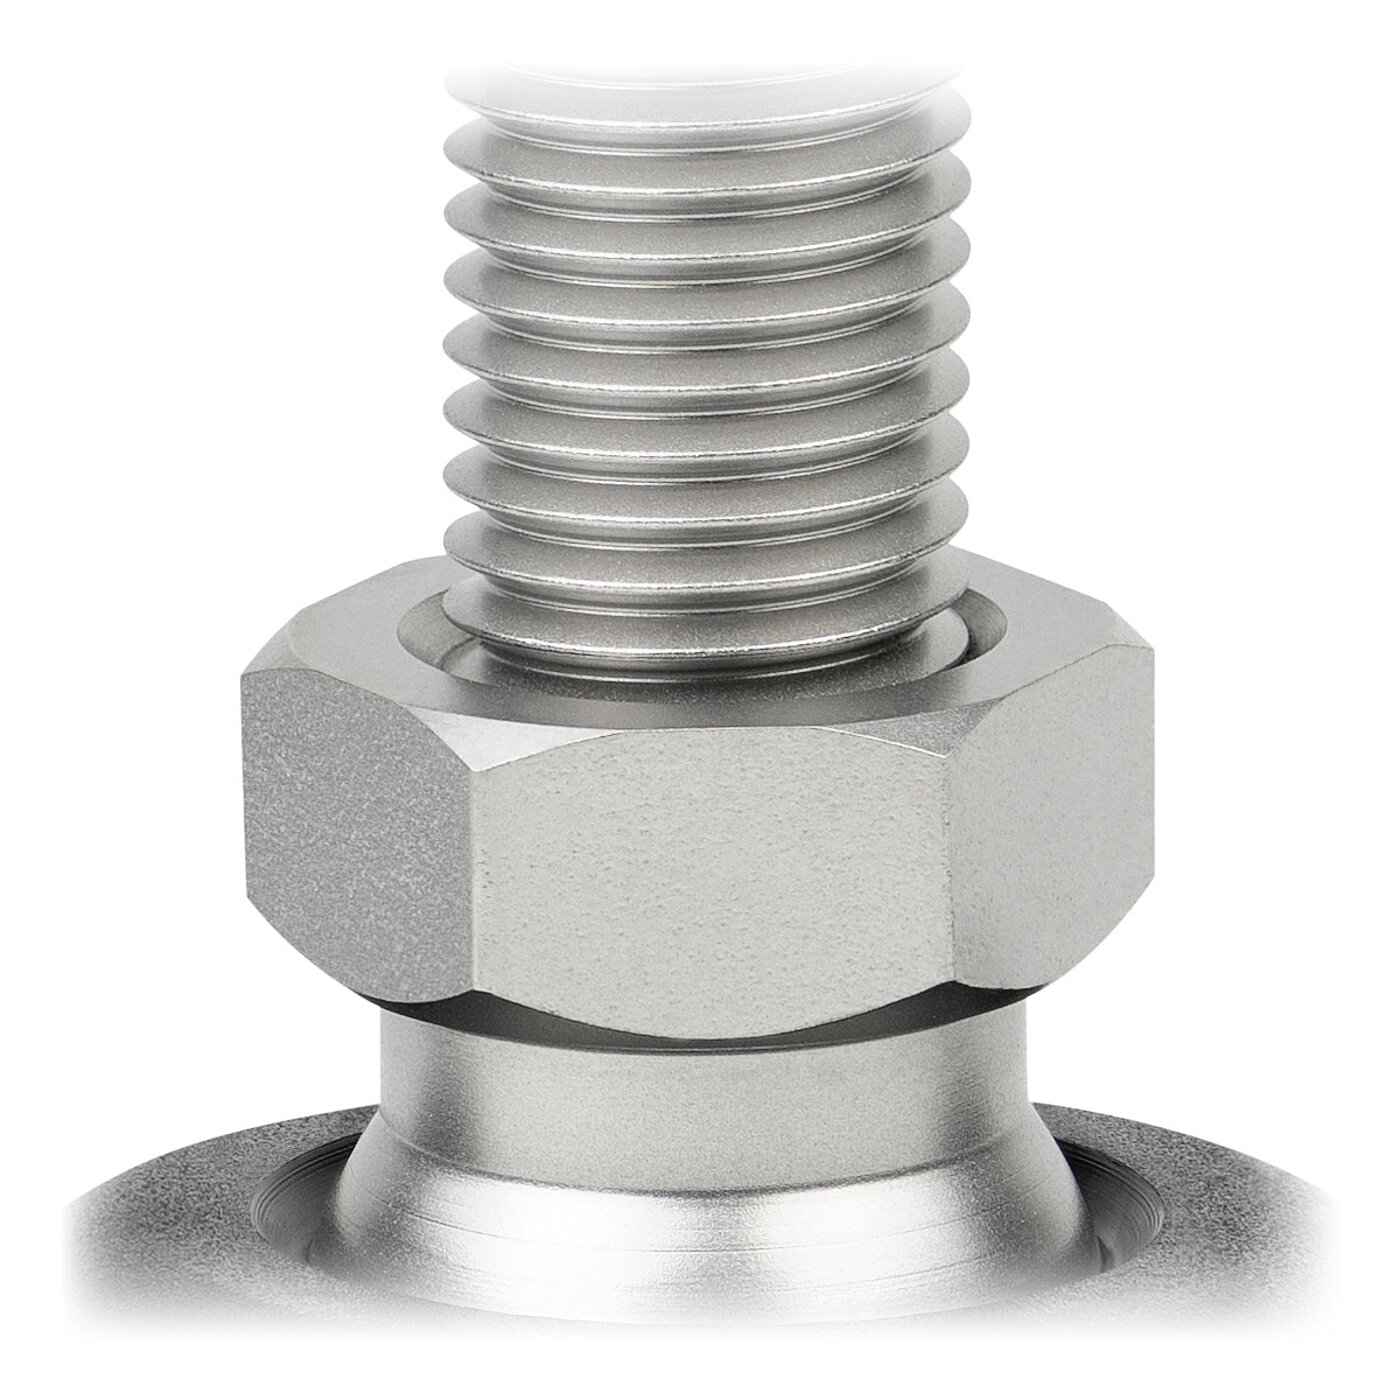 detailed view of a pendulum-action hexagonal spanner flat ball joint made of stainless steel and screwed-in levelling screw, placed in a black composite material corpus, isolated on white background